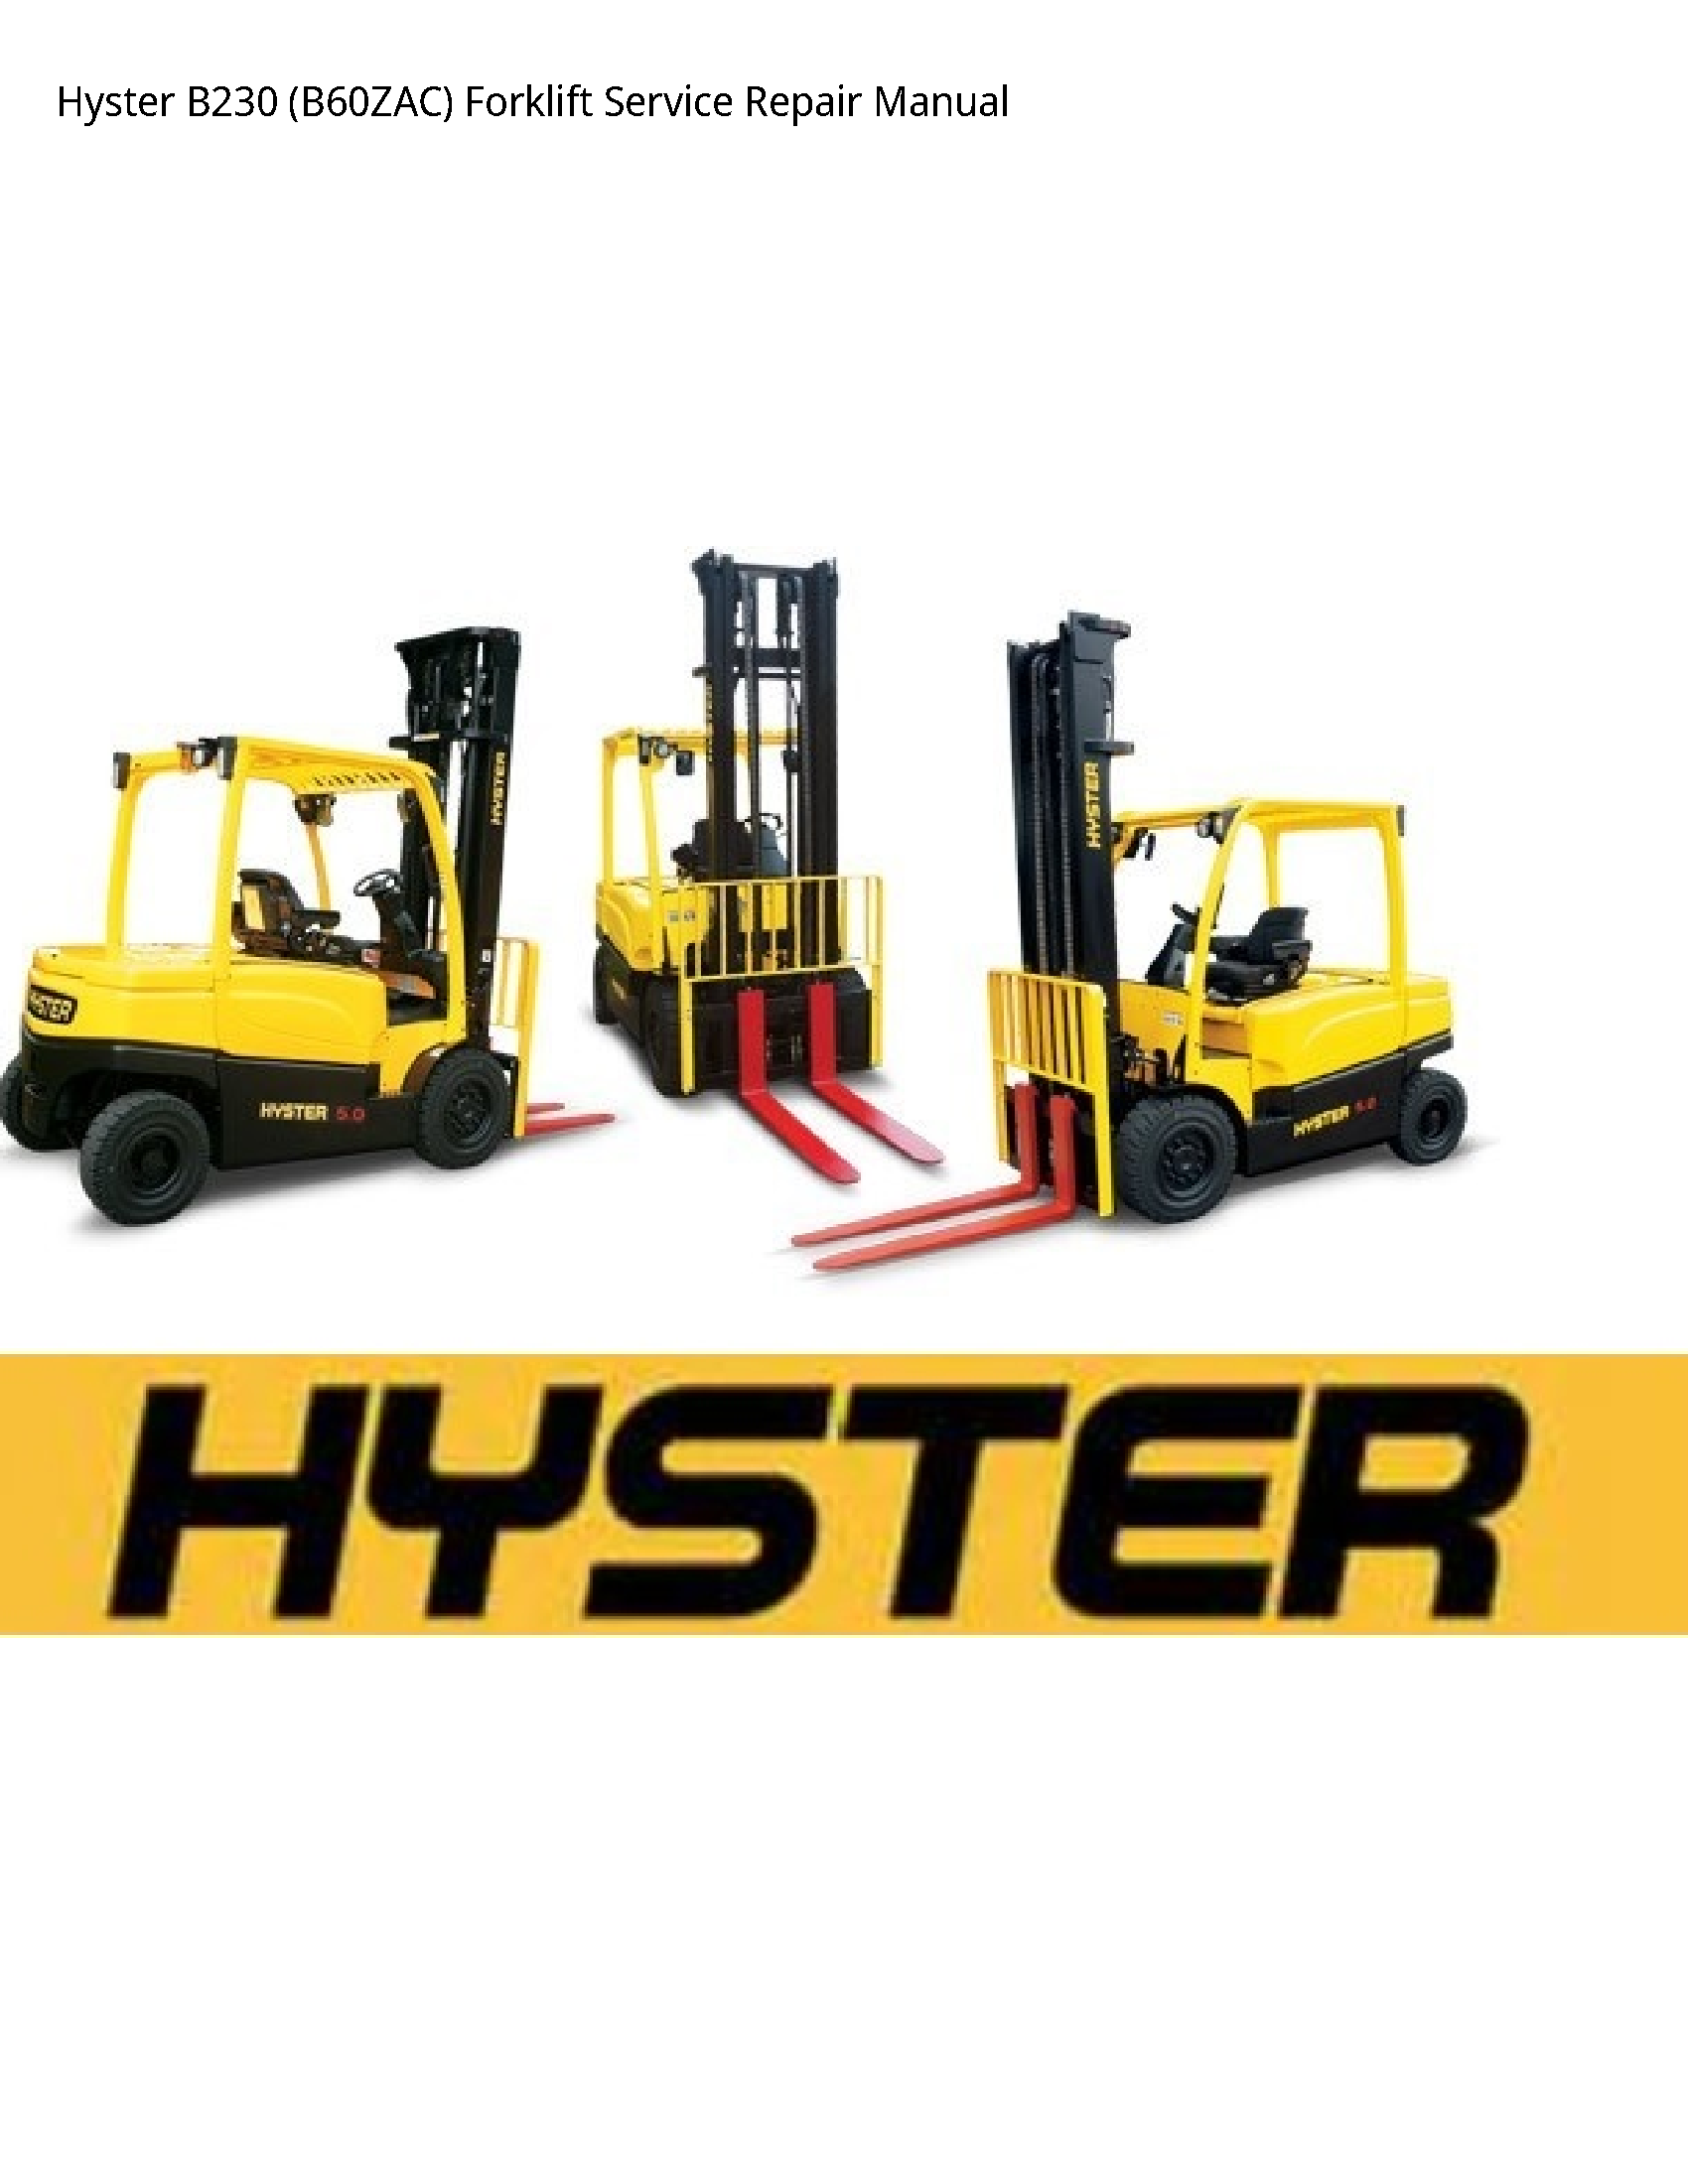 Hyster B230 Forklift manual